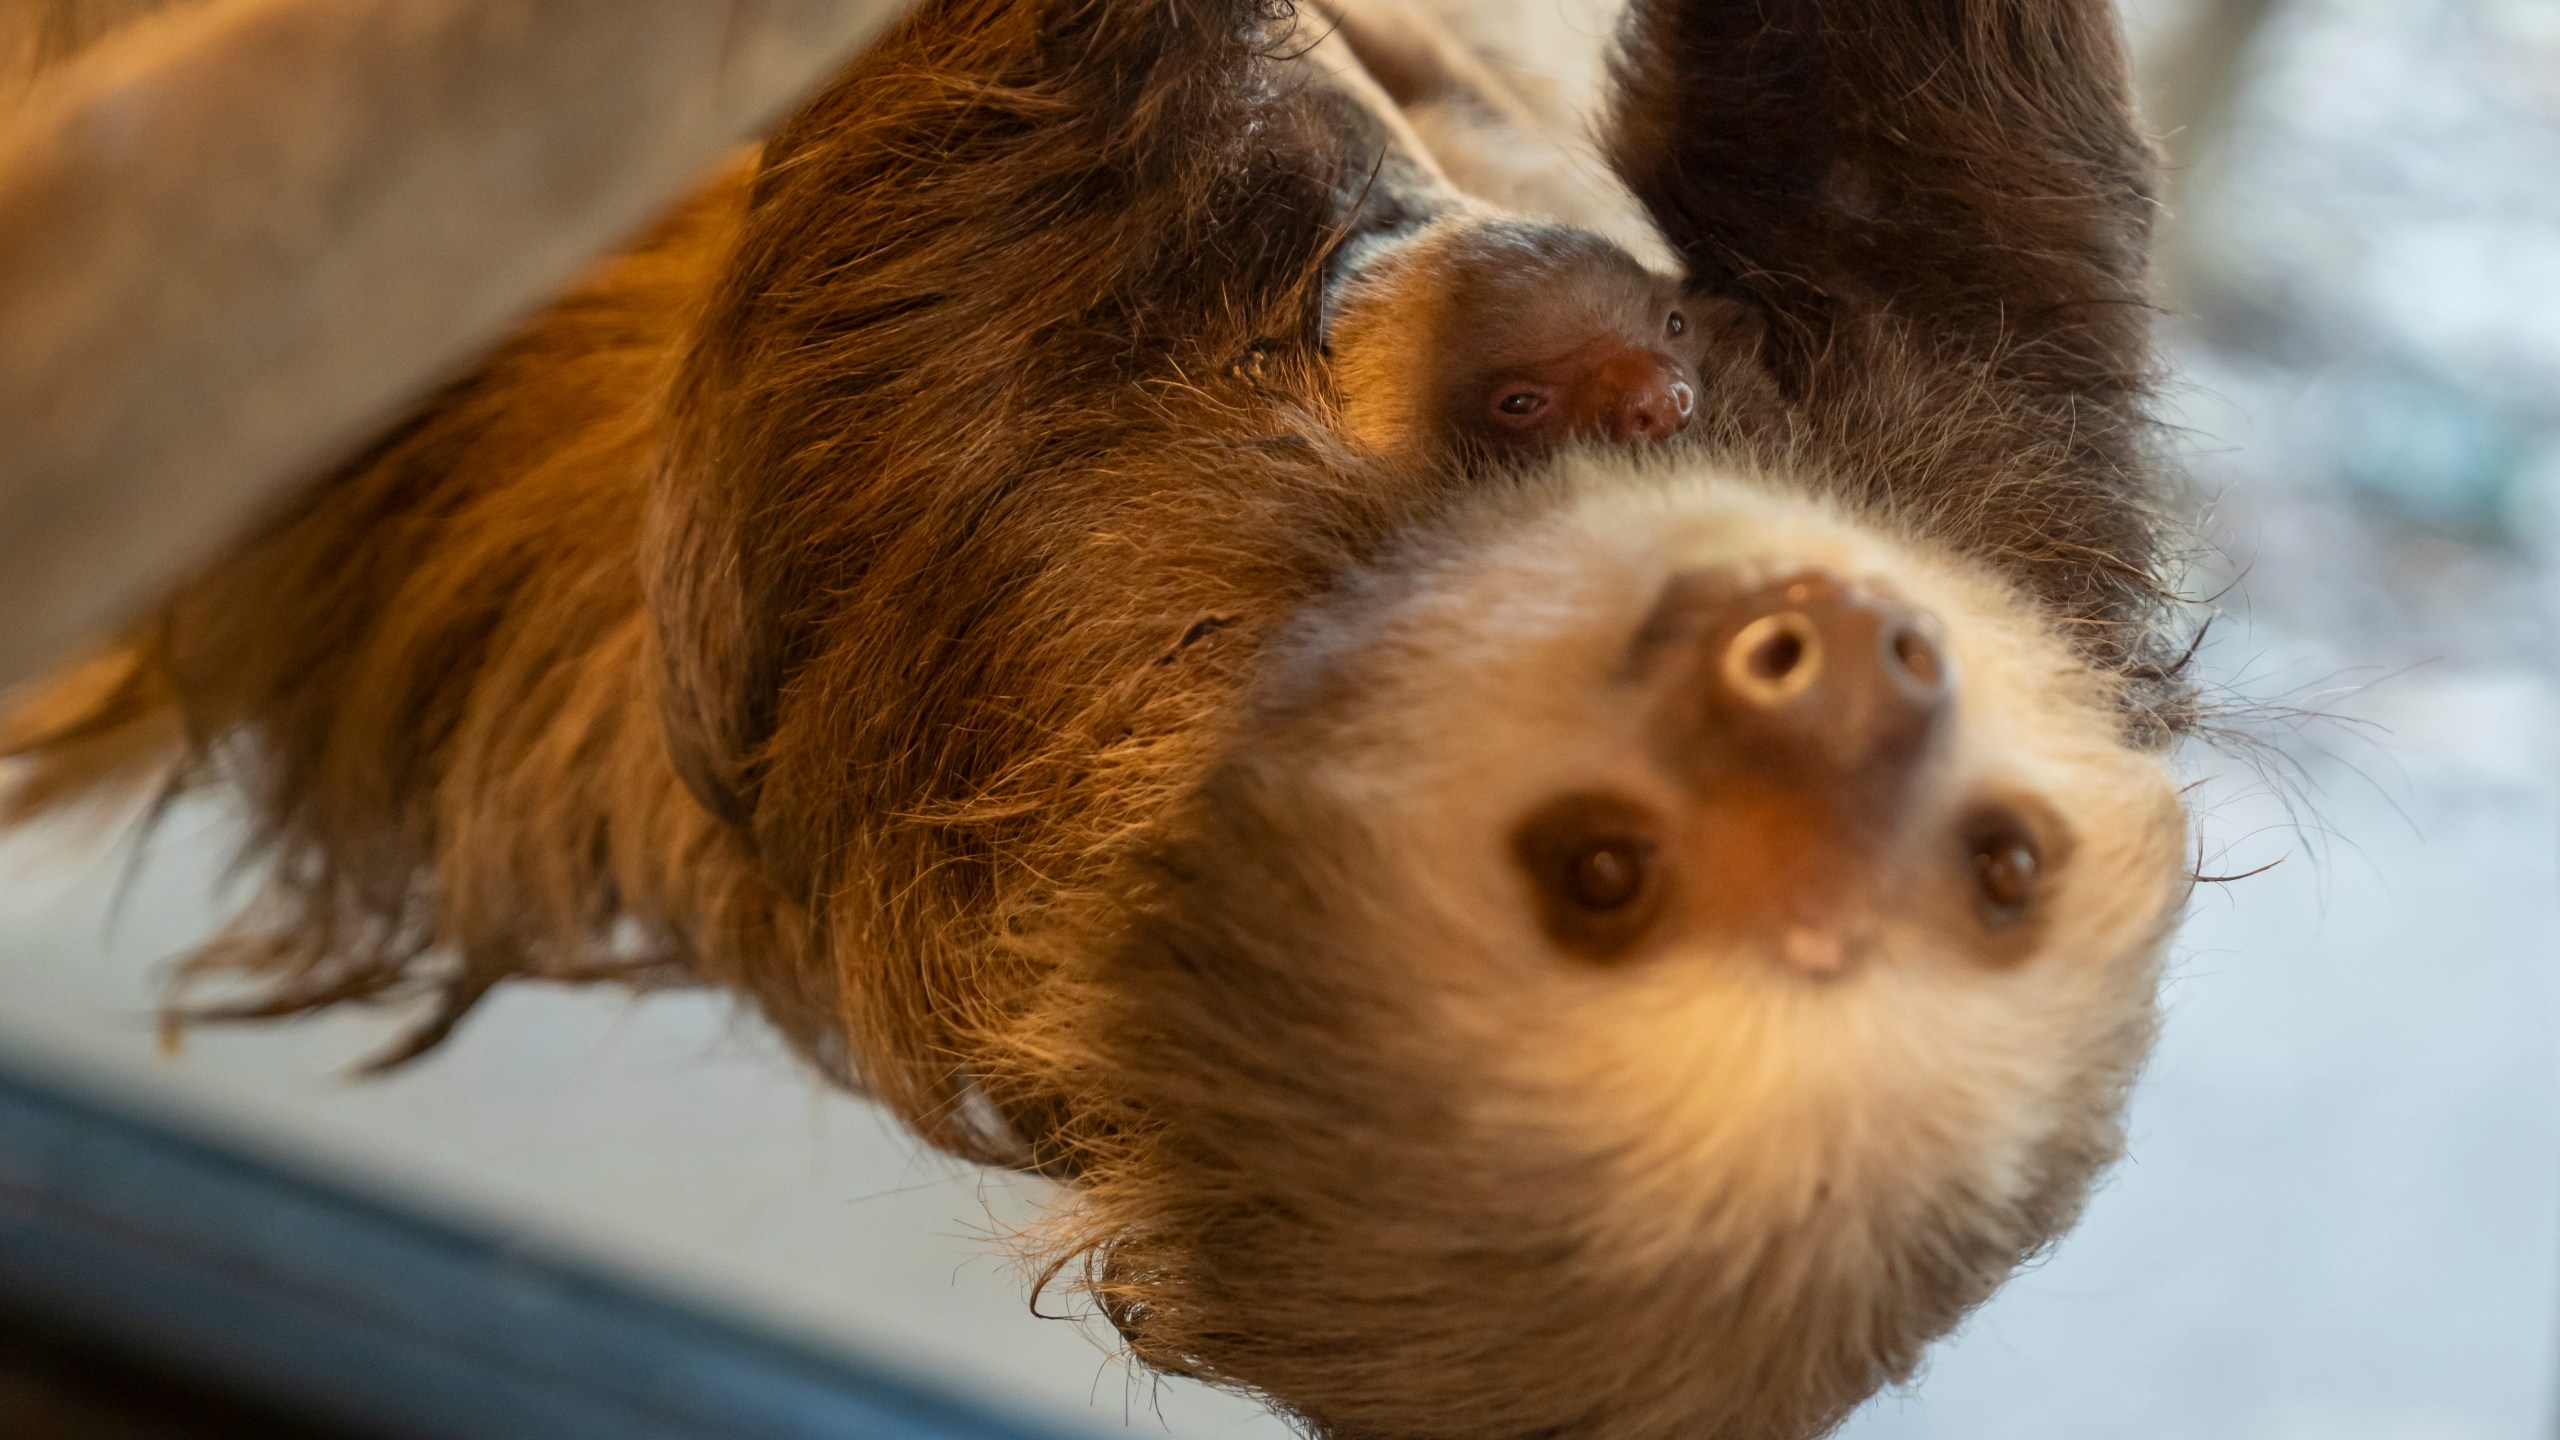 A baby sloth is seen with its mother at the Palm Beach Zoo Conservation Society, Tuesday, Jan. 30, 2024 in West Palm Beach, Fla. Zookeepers have been monitoring the baby sloth and its mother, Wilbur, since witnessing the birth early in the morning of Jan. 23. (Palm Beach Zoo via AP)